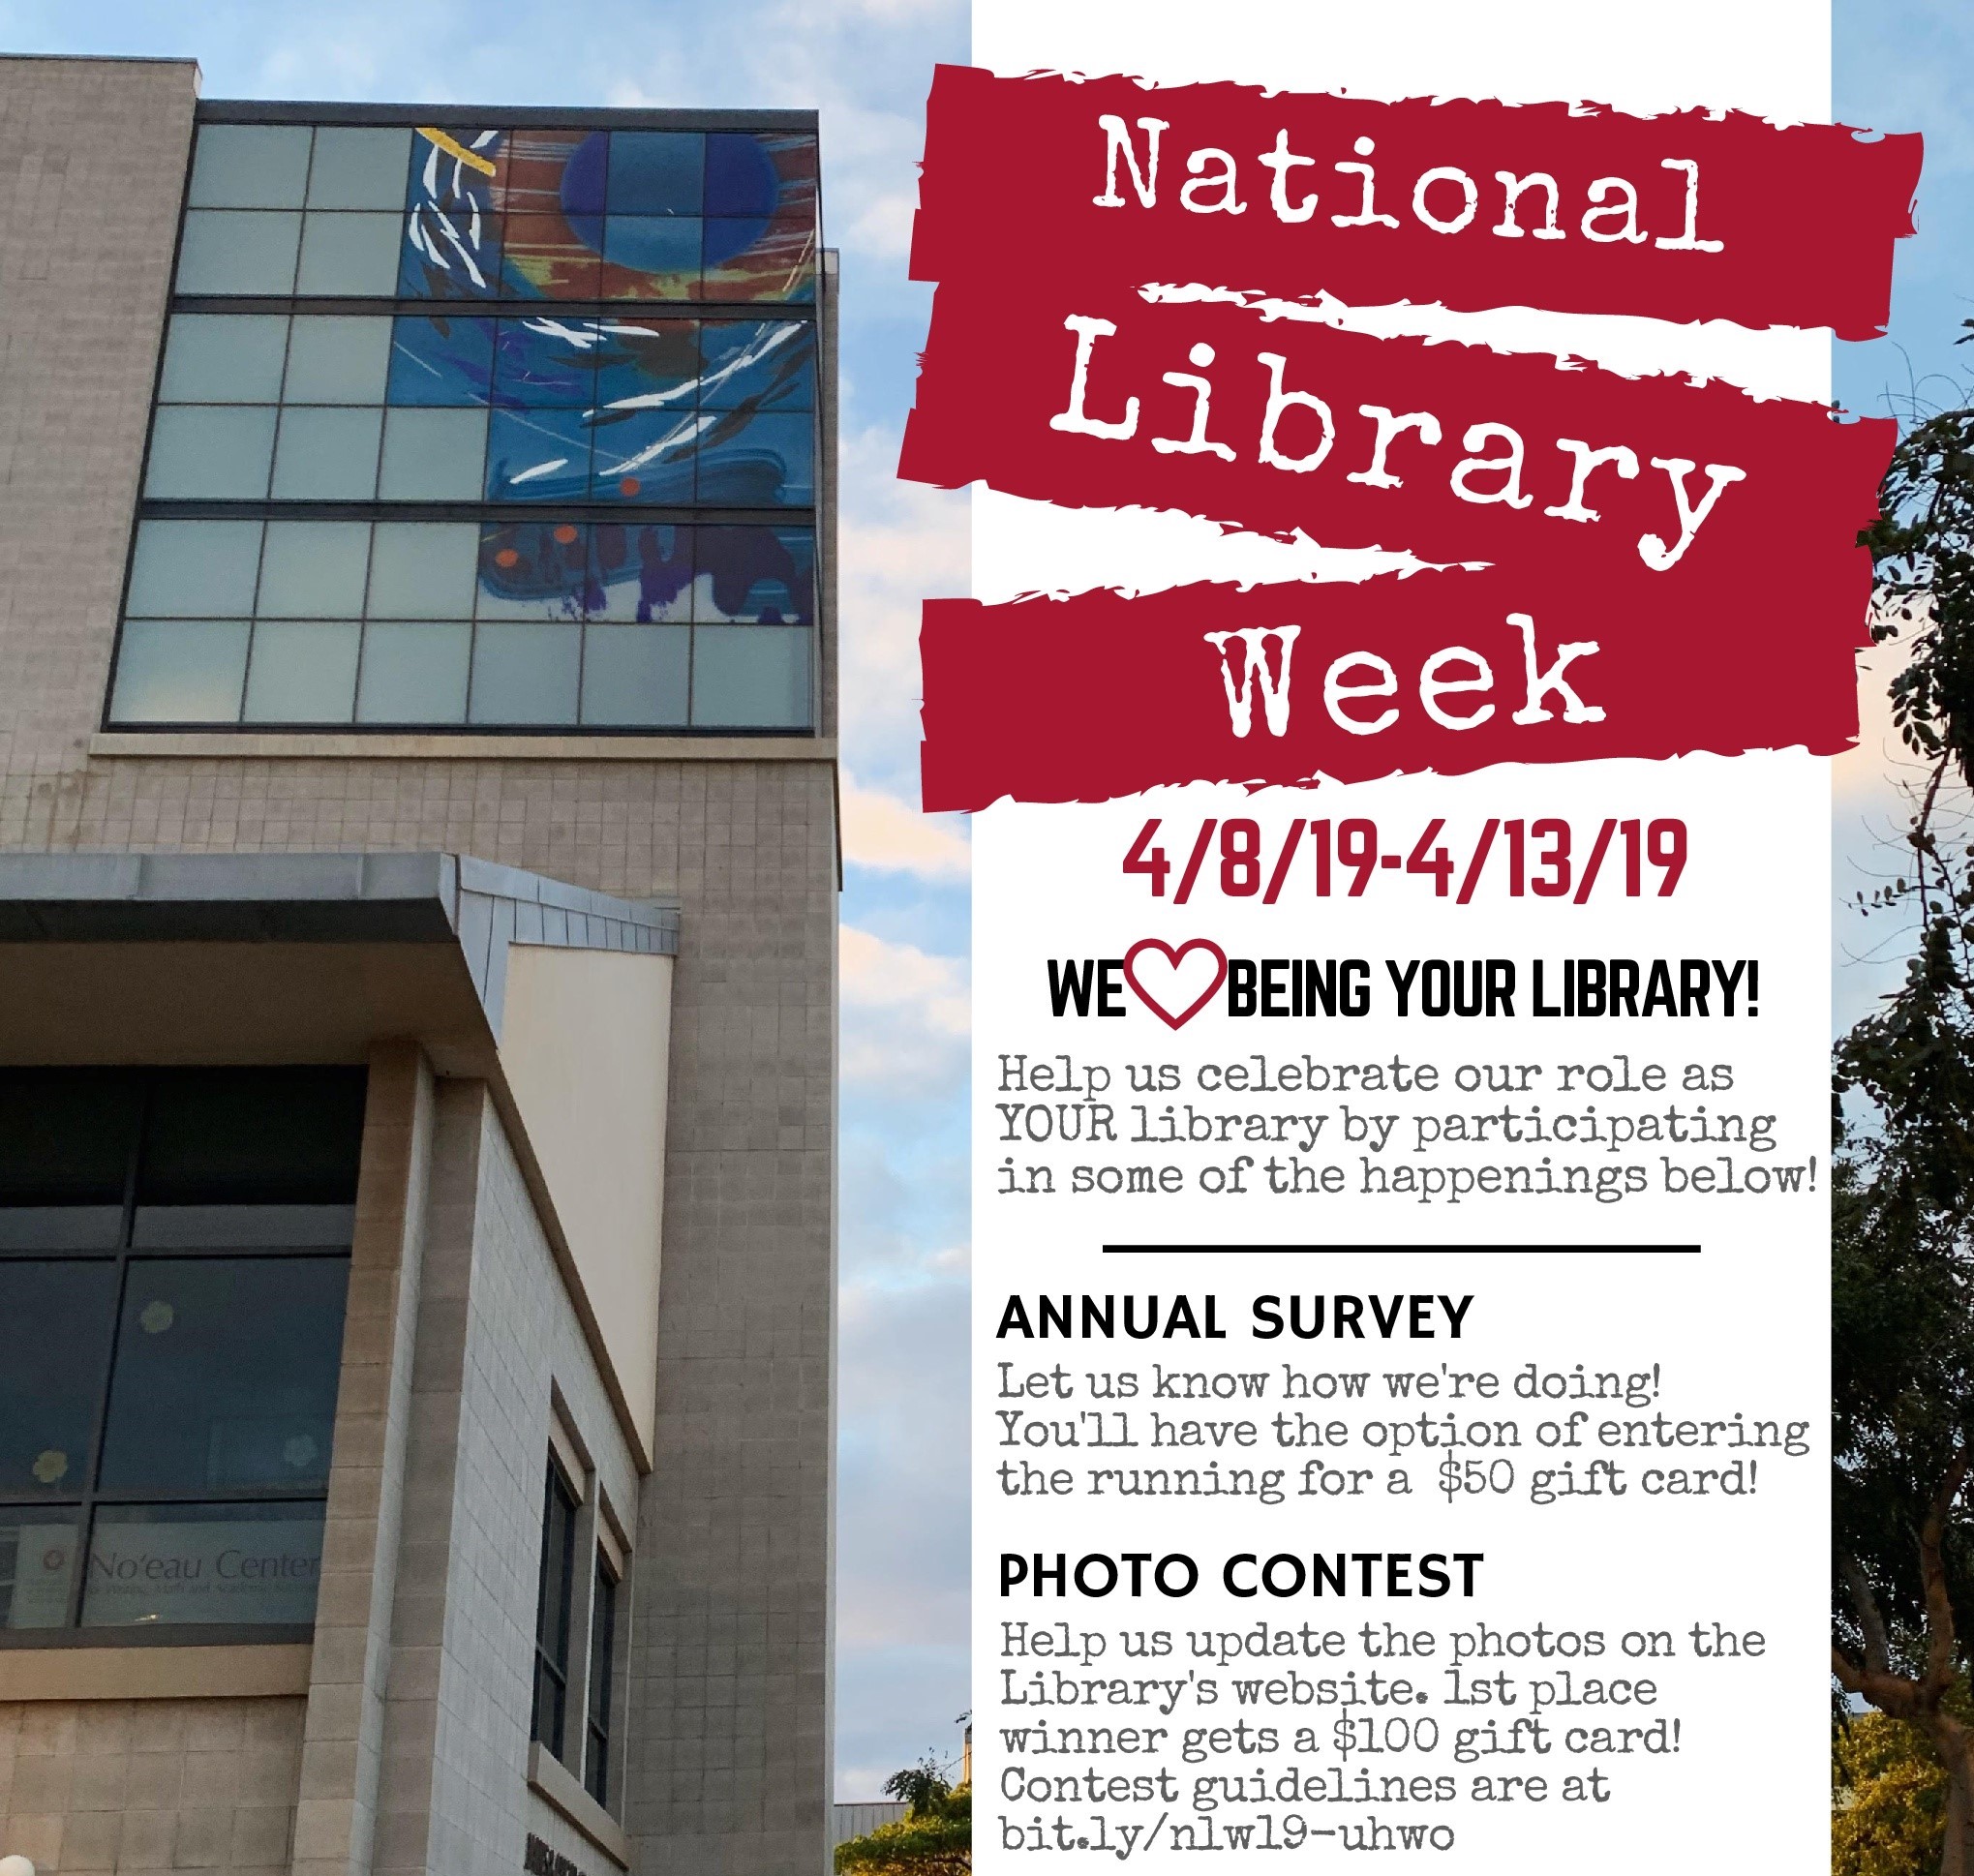 Photo of library plus text about National Library week, an annual survey, and photo contest